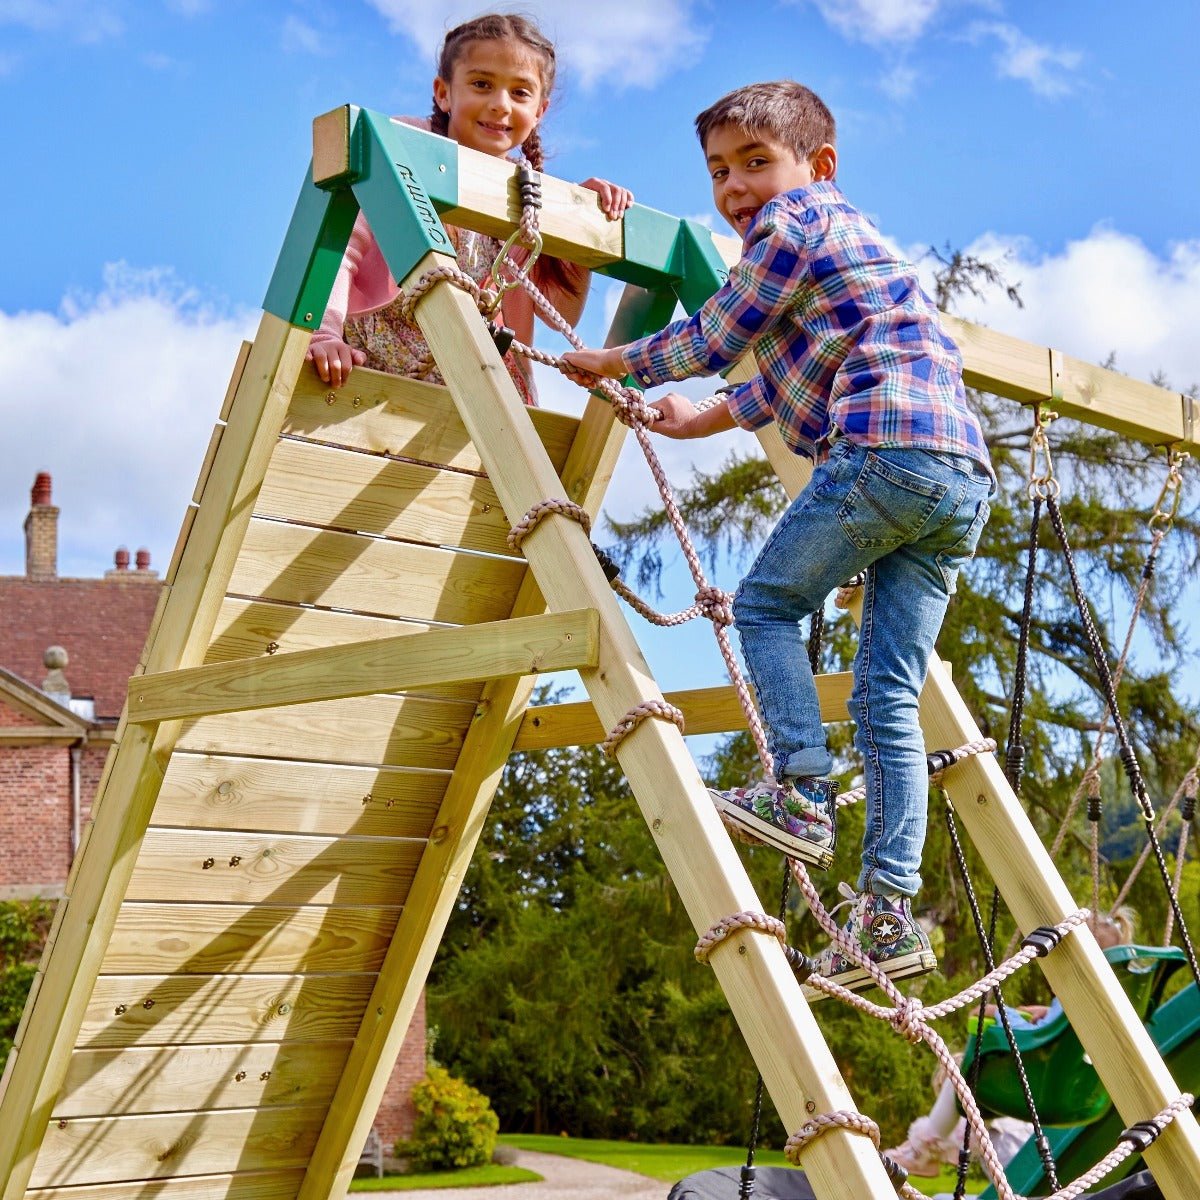 Rebo Challenge Wooden Climbing Frame with Swings, Slide and Up & over Climbing wall - Sanford Pink